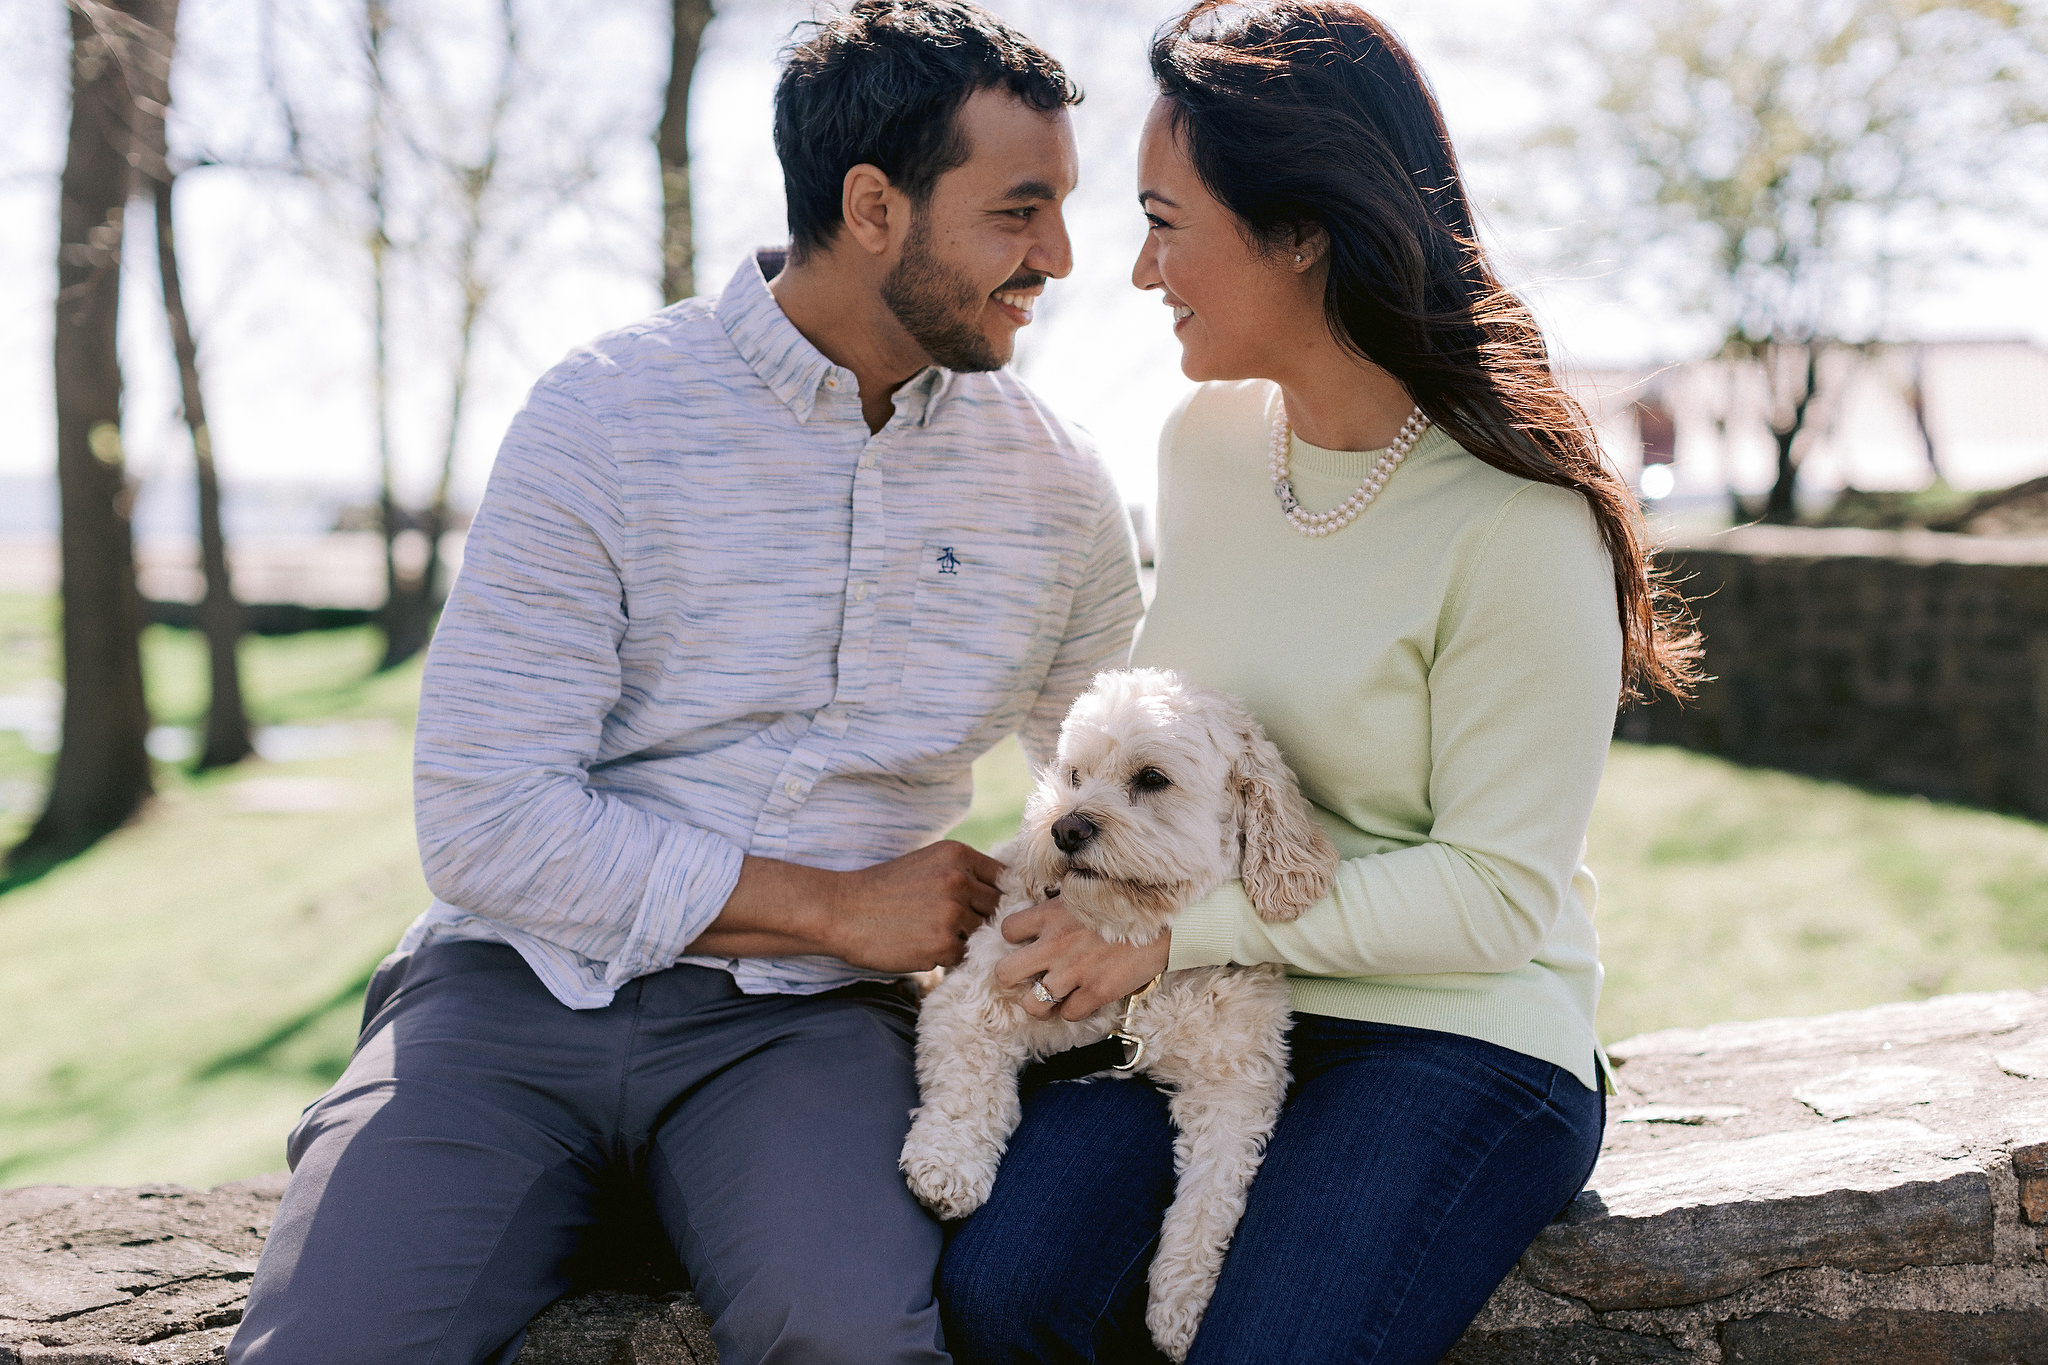 The engaged couple is looking at each other's eyes while their dog is lying in their laps. Editorial Engagement session by Jenny Fu Studio.